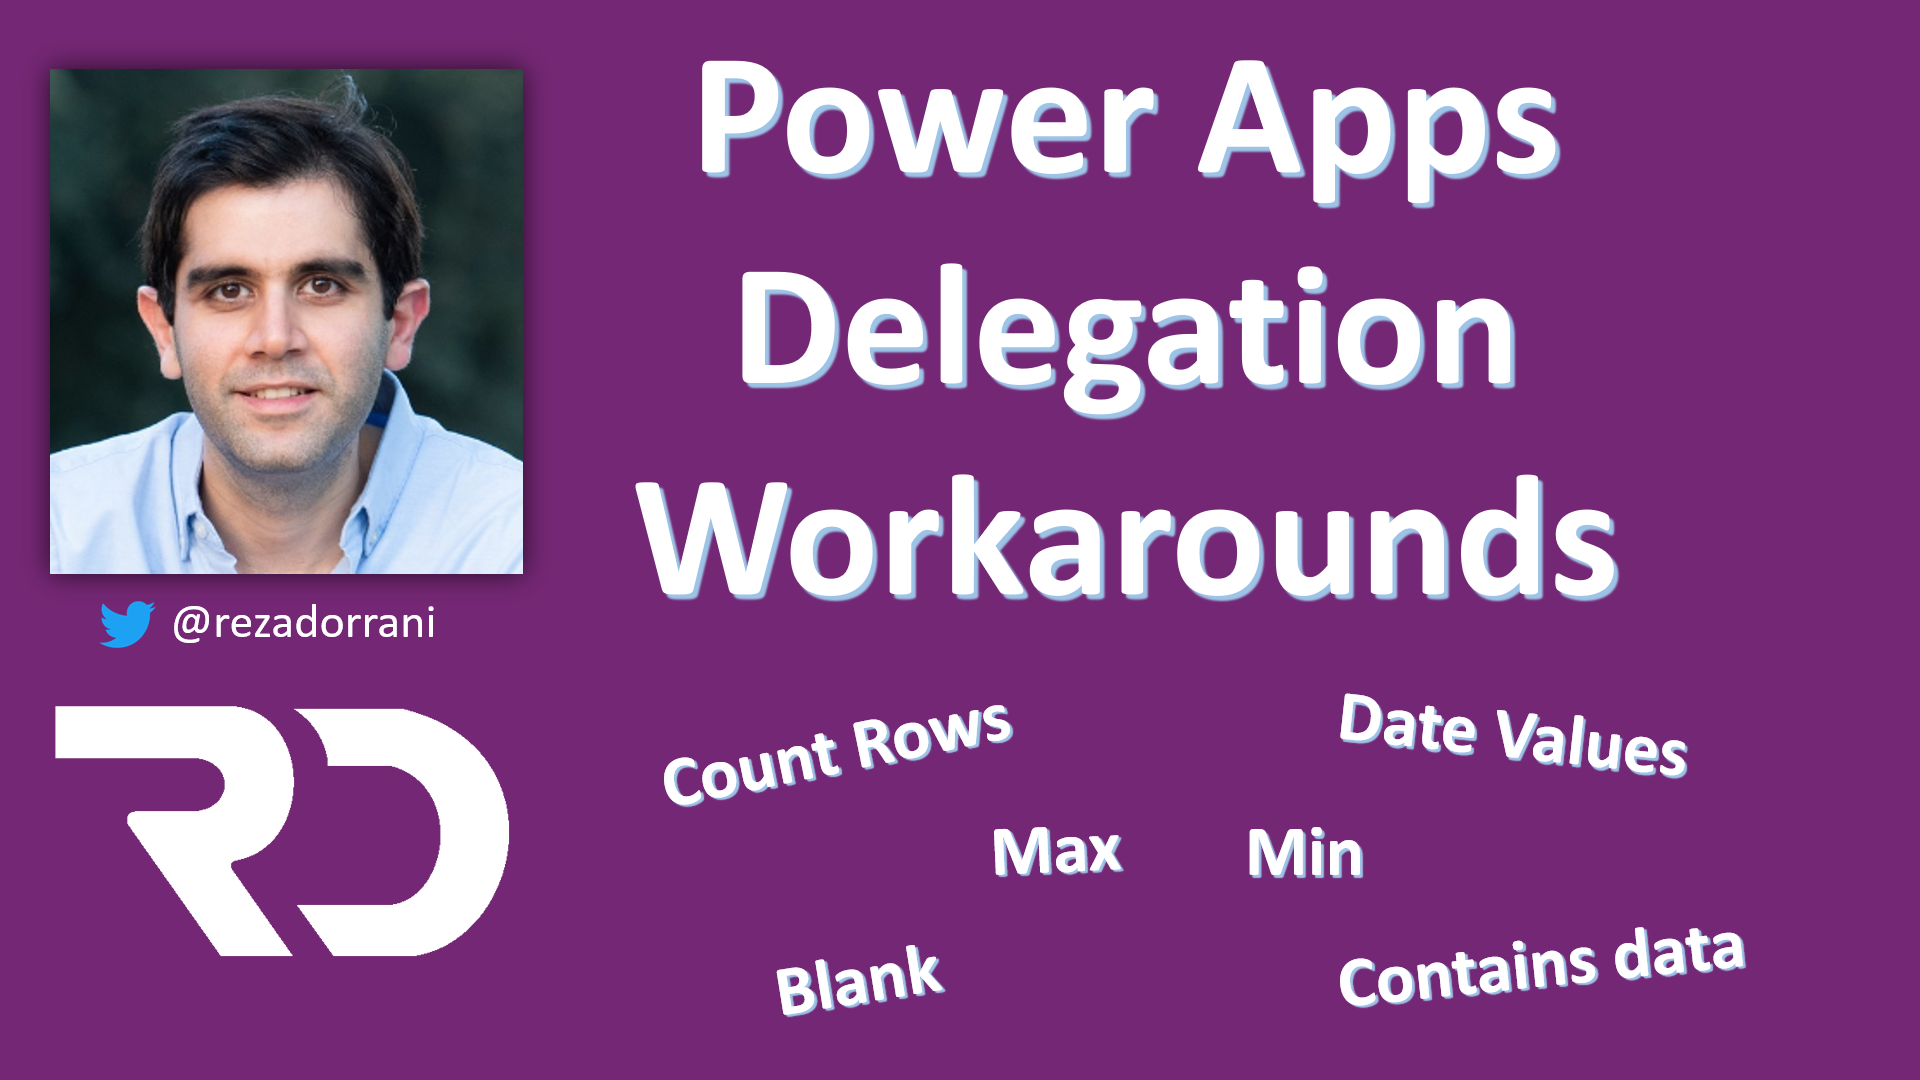 Power Apps – Count Rows in a SharePoint list/library – Avoid delegation